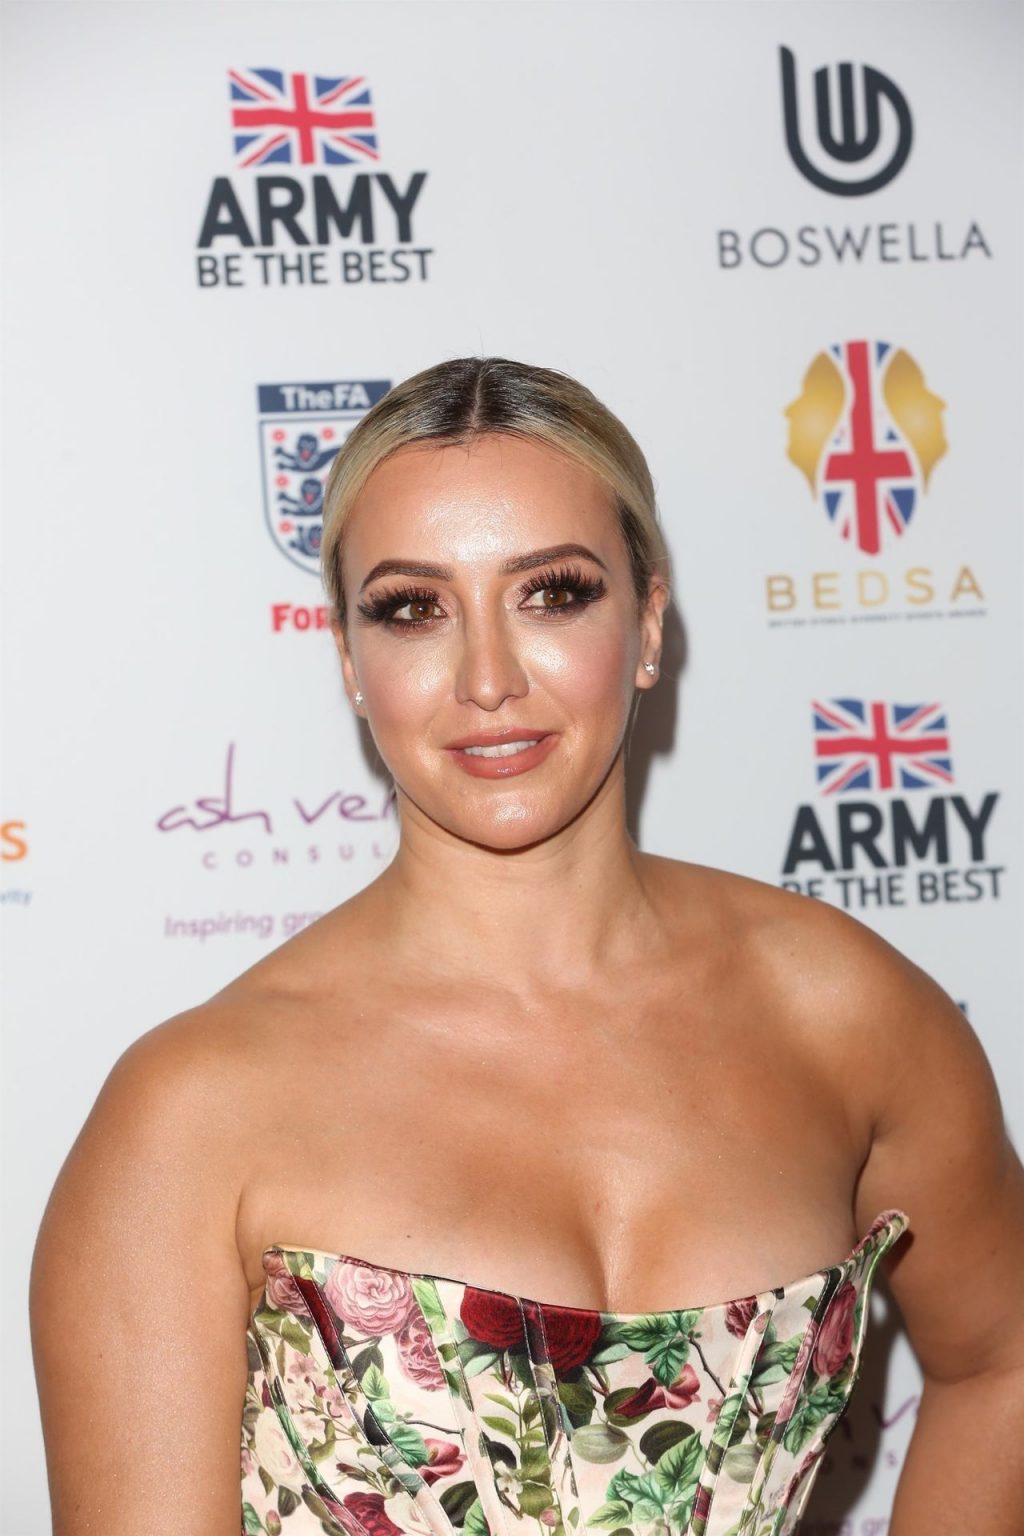 Melissa Takimoglu Shows Her Cleavage at the British Ethnic Diversity Sports Awards (12 Photos)